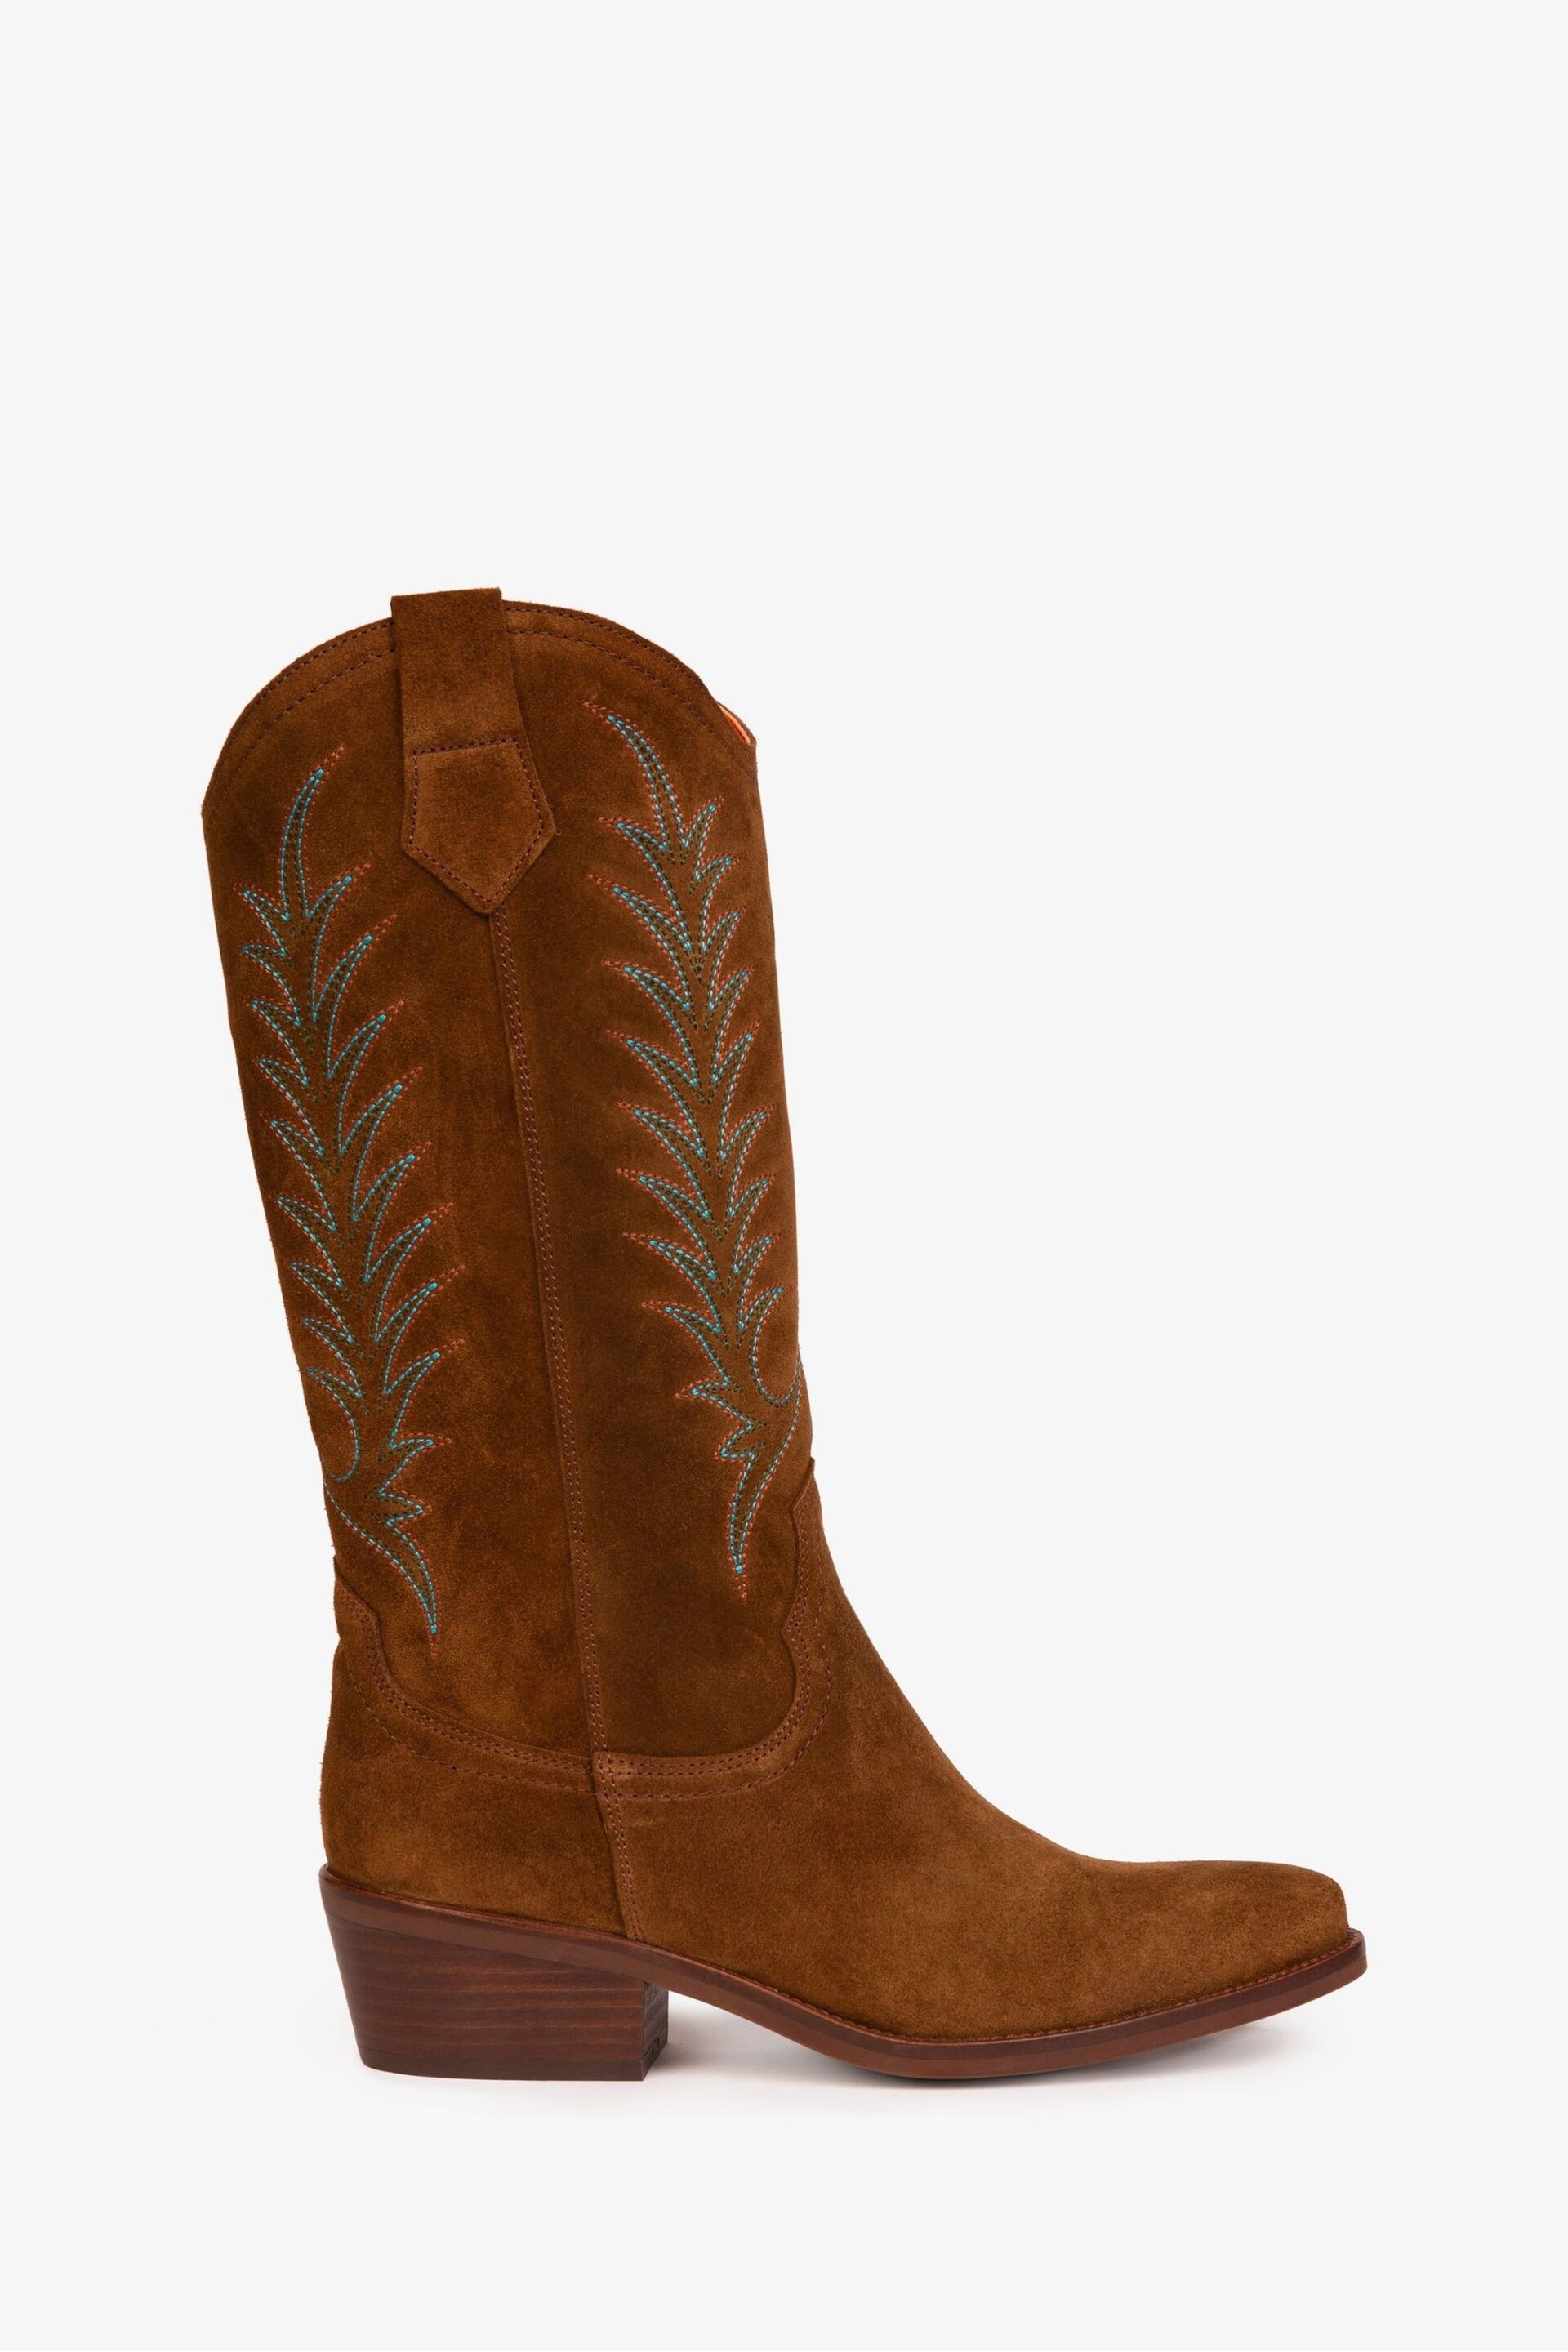 Penelope Chilvers Goldie Embroidered Cowboy Brown Boots - Image 8 of 16